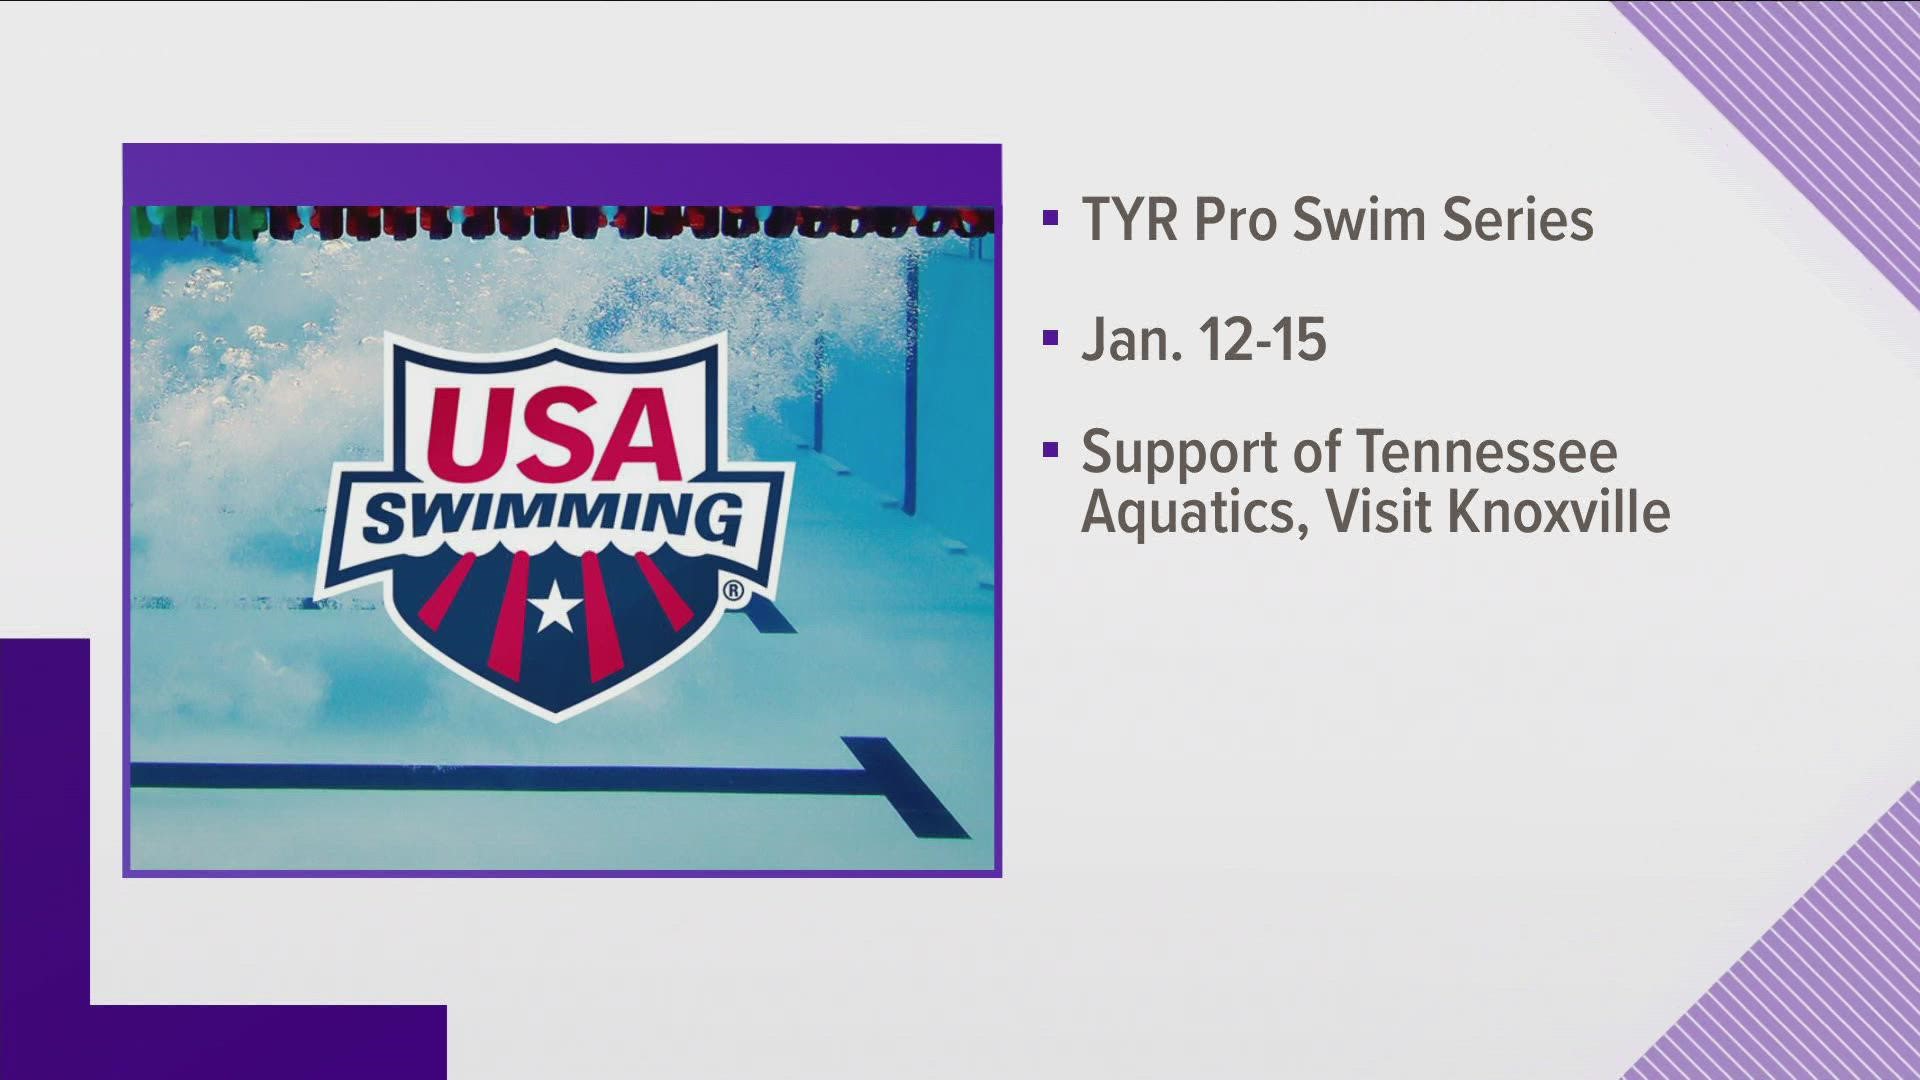 The TYR Pro Swim Series meet was set for January 12-15. Officials canceled the meet due to COVID-19.